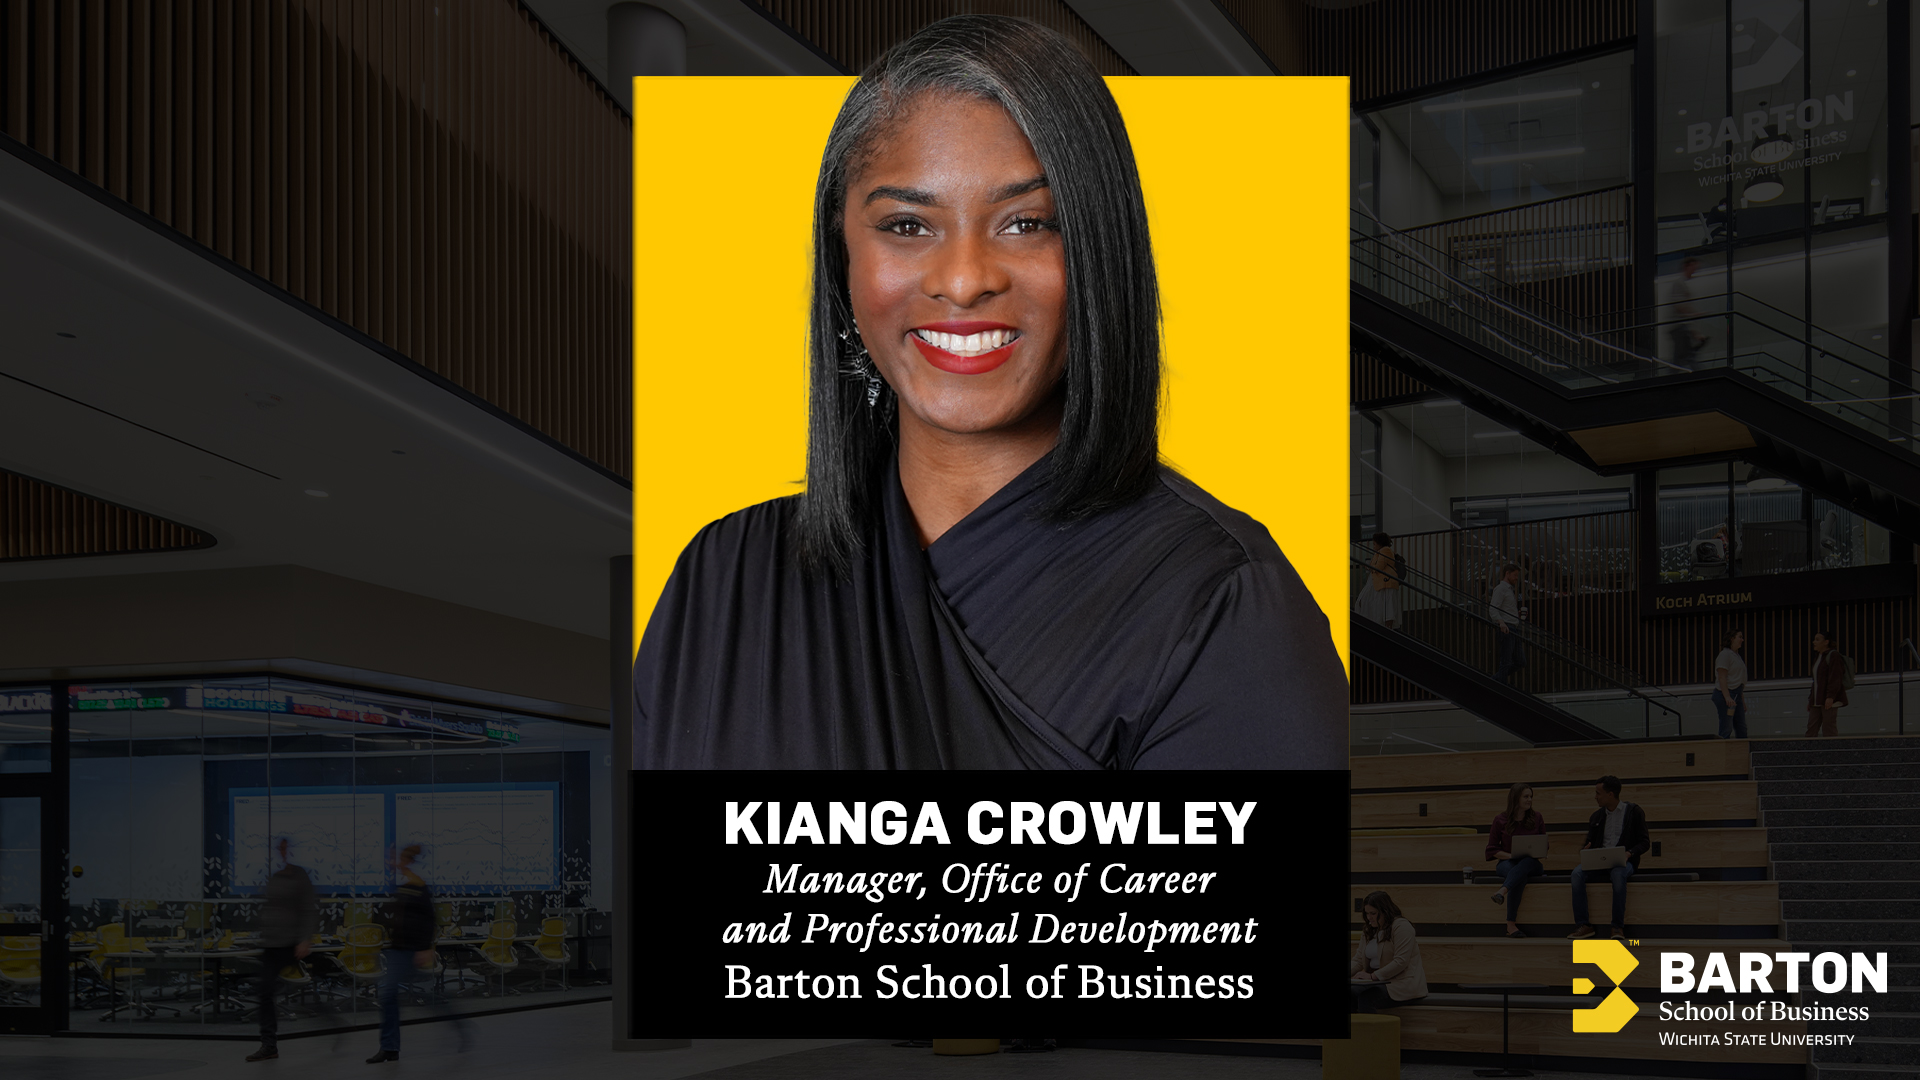 Kianga Crowley, the inaugural Manager of the Barton School’s Office of Career and Professional Development (OCPD).